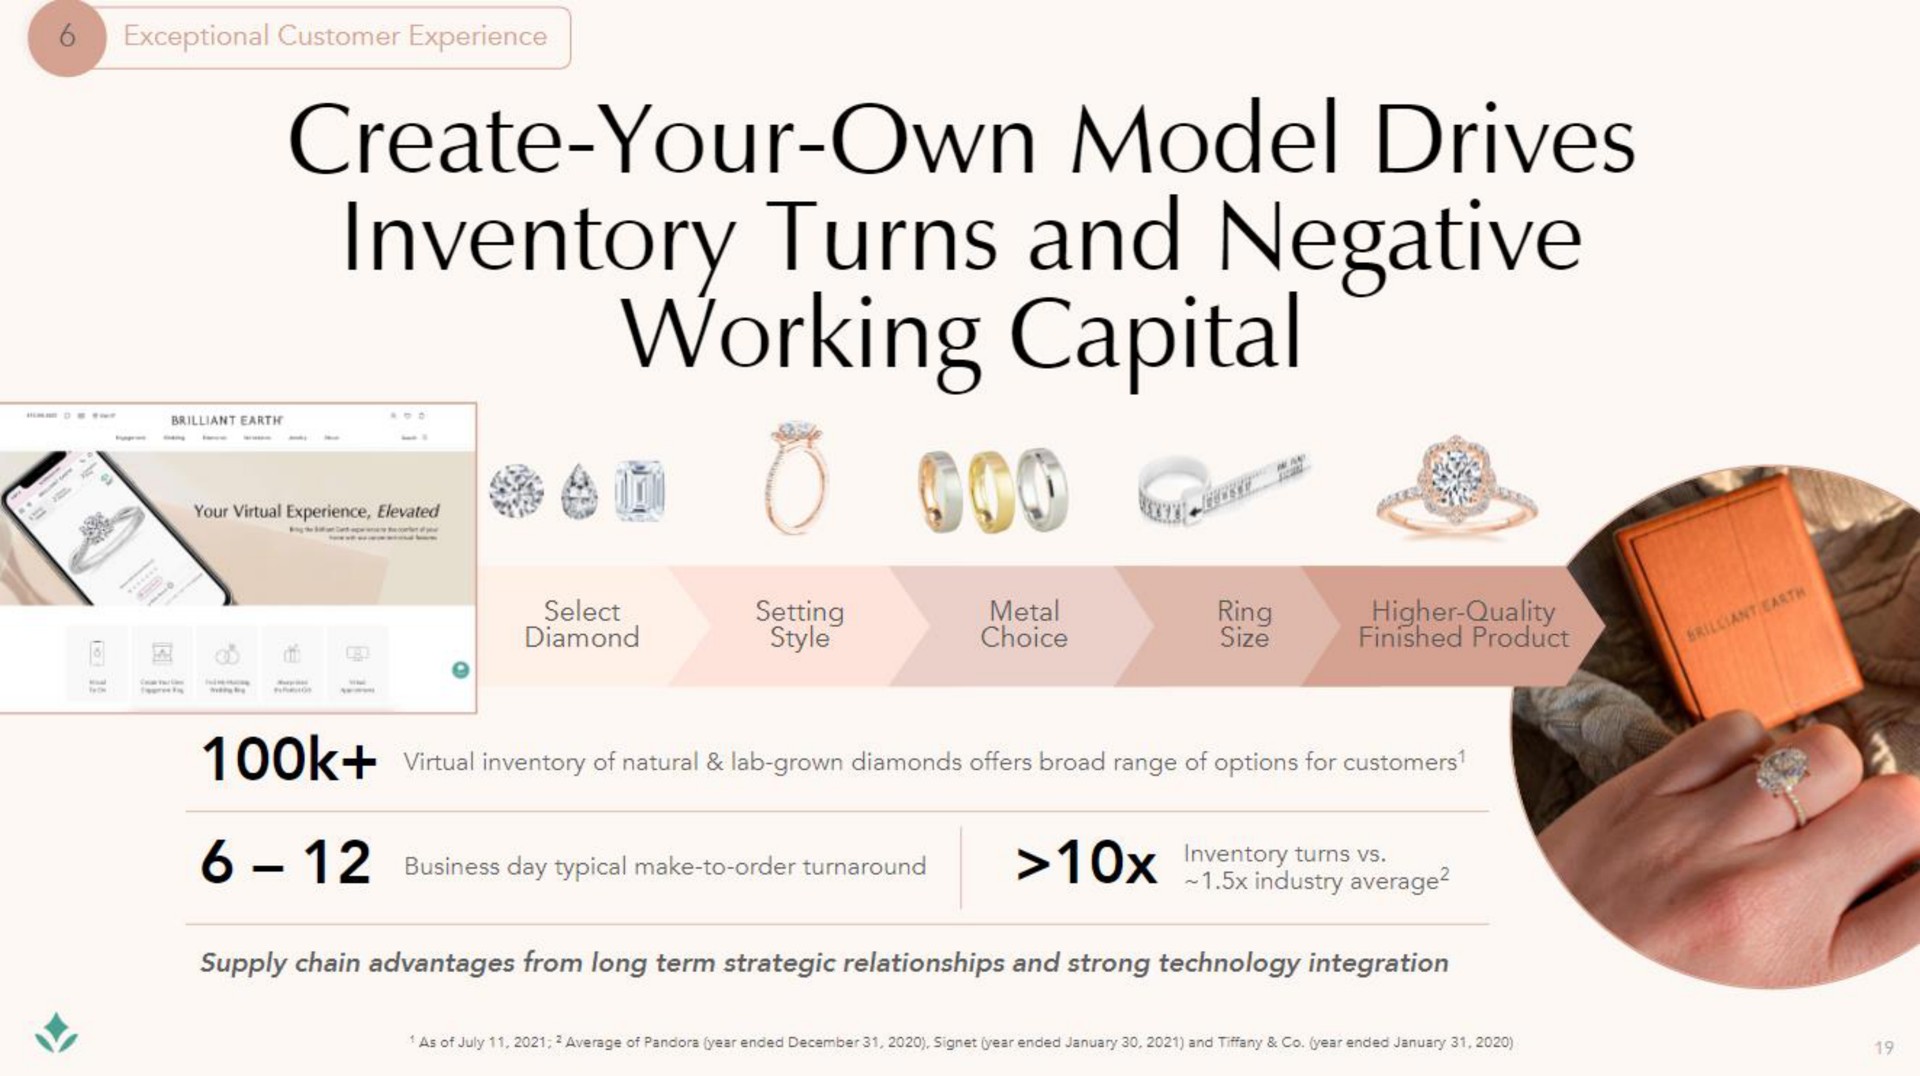 create your own model drives inventory turns and negative working capital i | Brilliant Earth